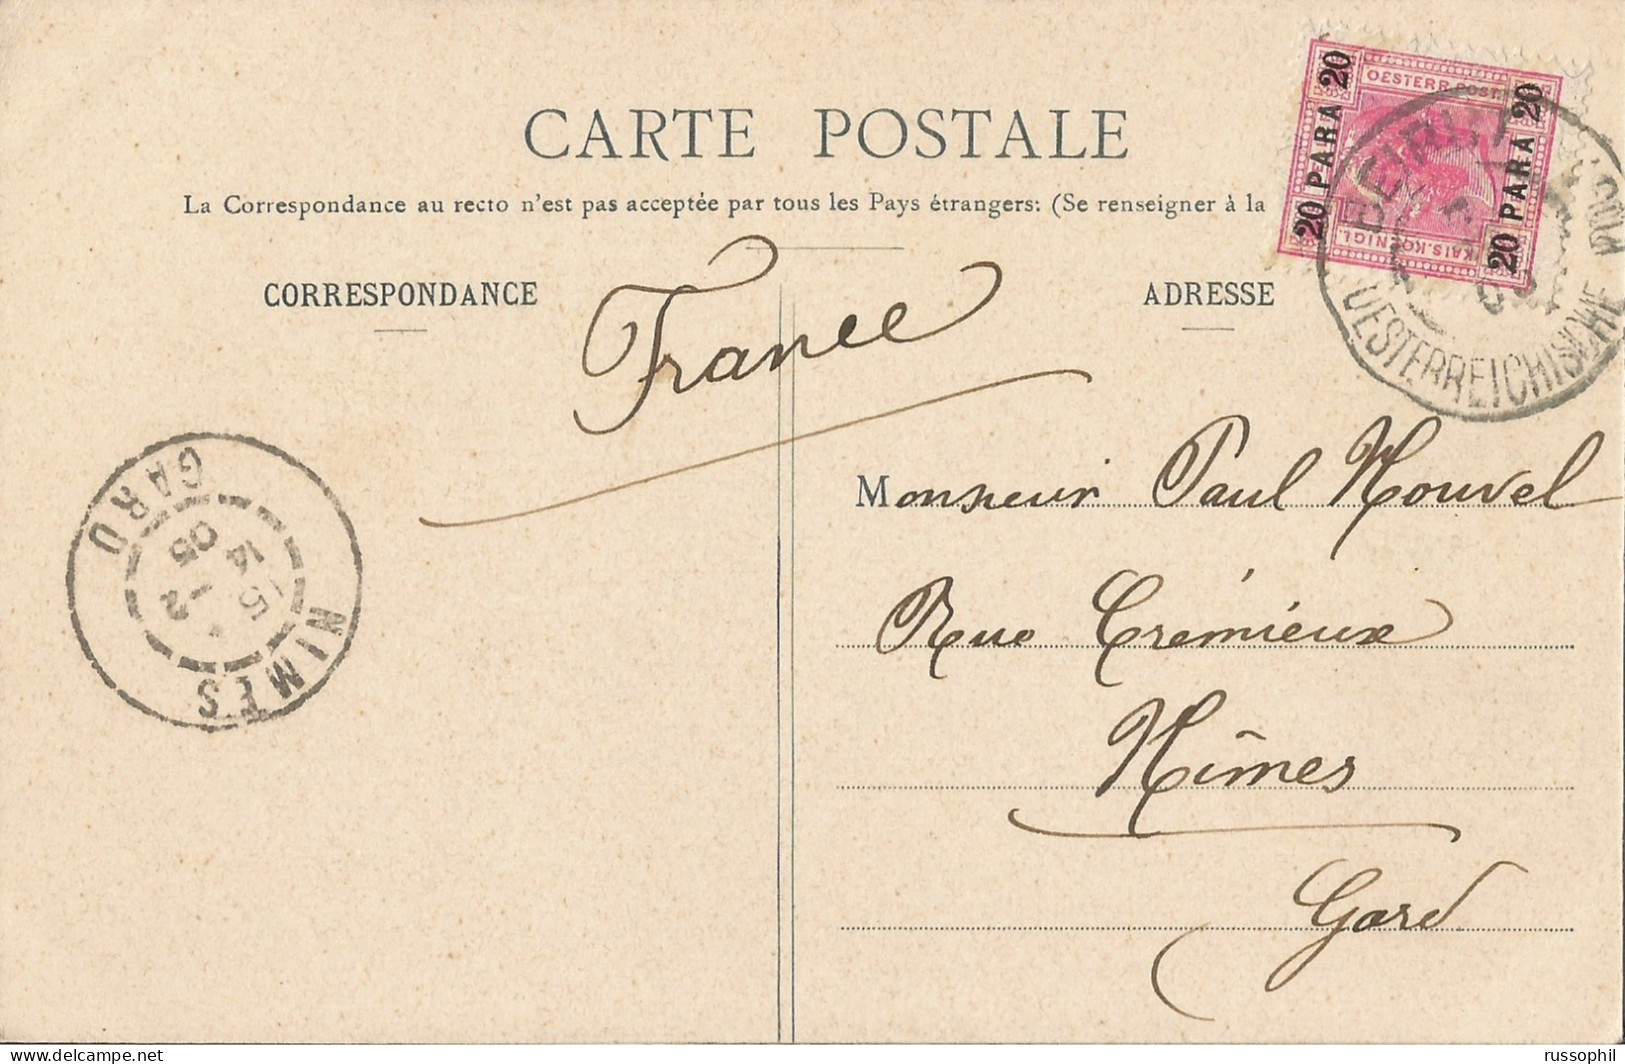 AUSTRIA - OST. POST IN DER LEVANTE - Mi #44 ALONE FRANKING PC (VIEW OF DAMAS) FROM BEIRUT TO FRANCE - 1905 - Oriente Austriaco